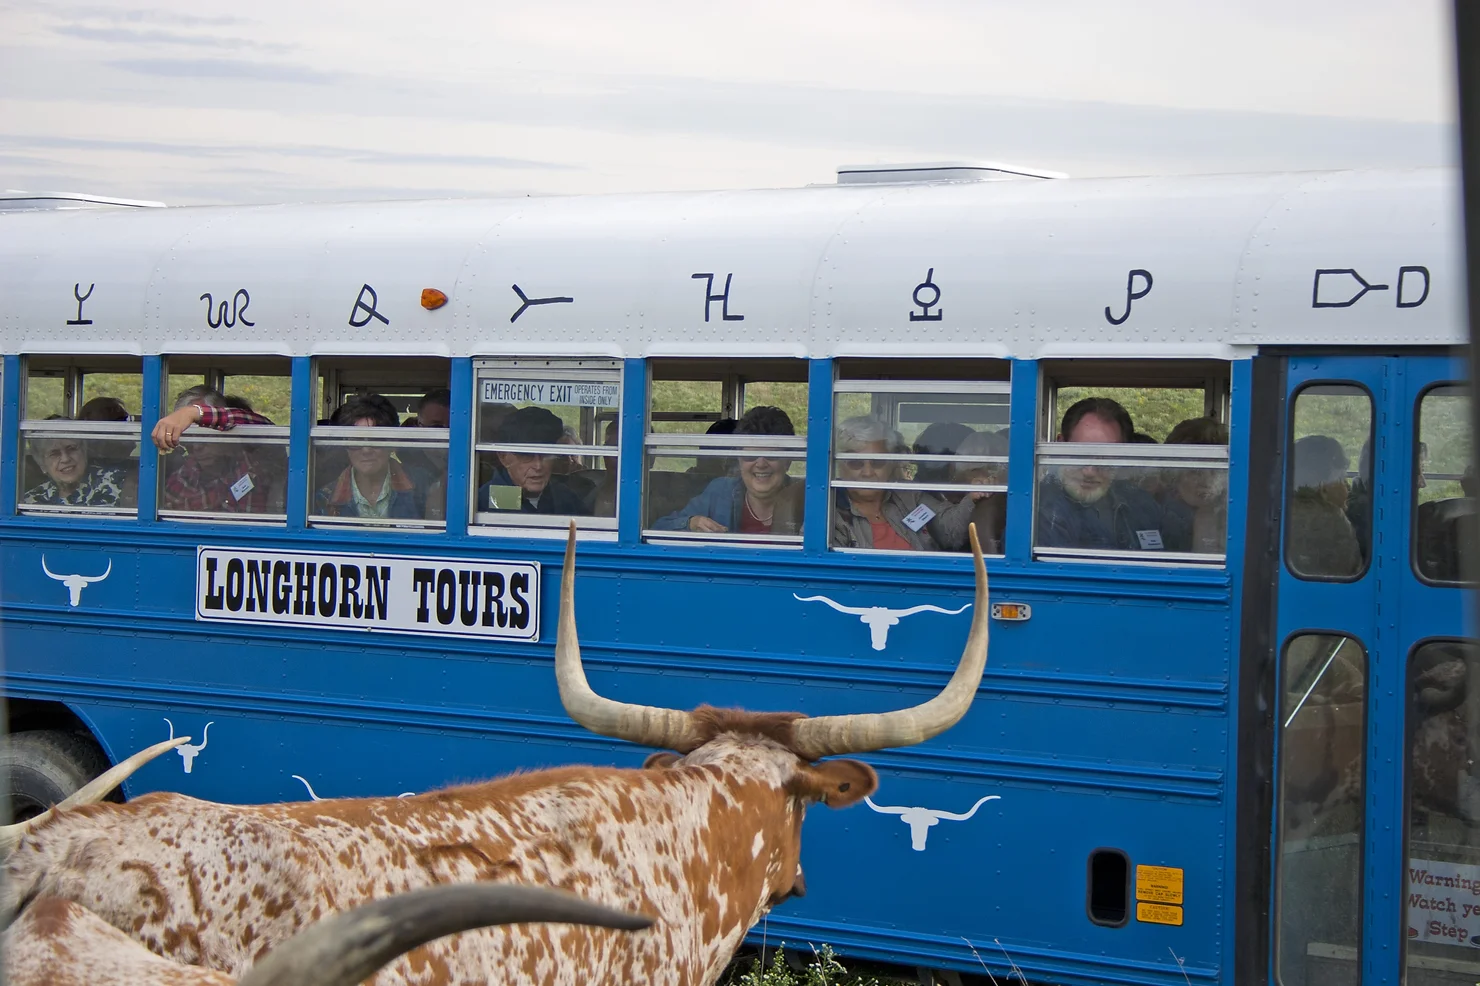 A bus tour enjoys the sights of the longhorn cattle at Dicksons Cattle